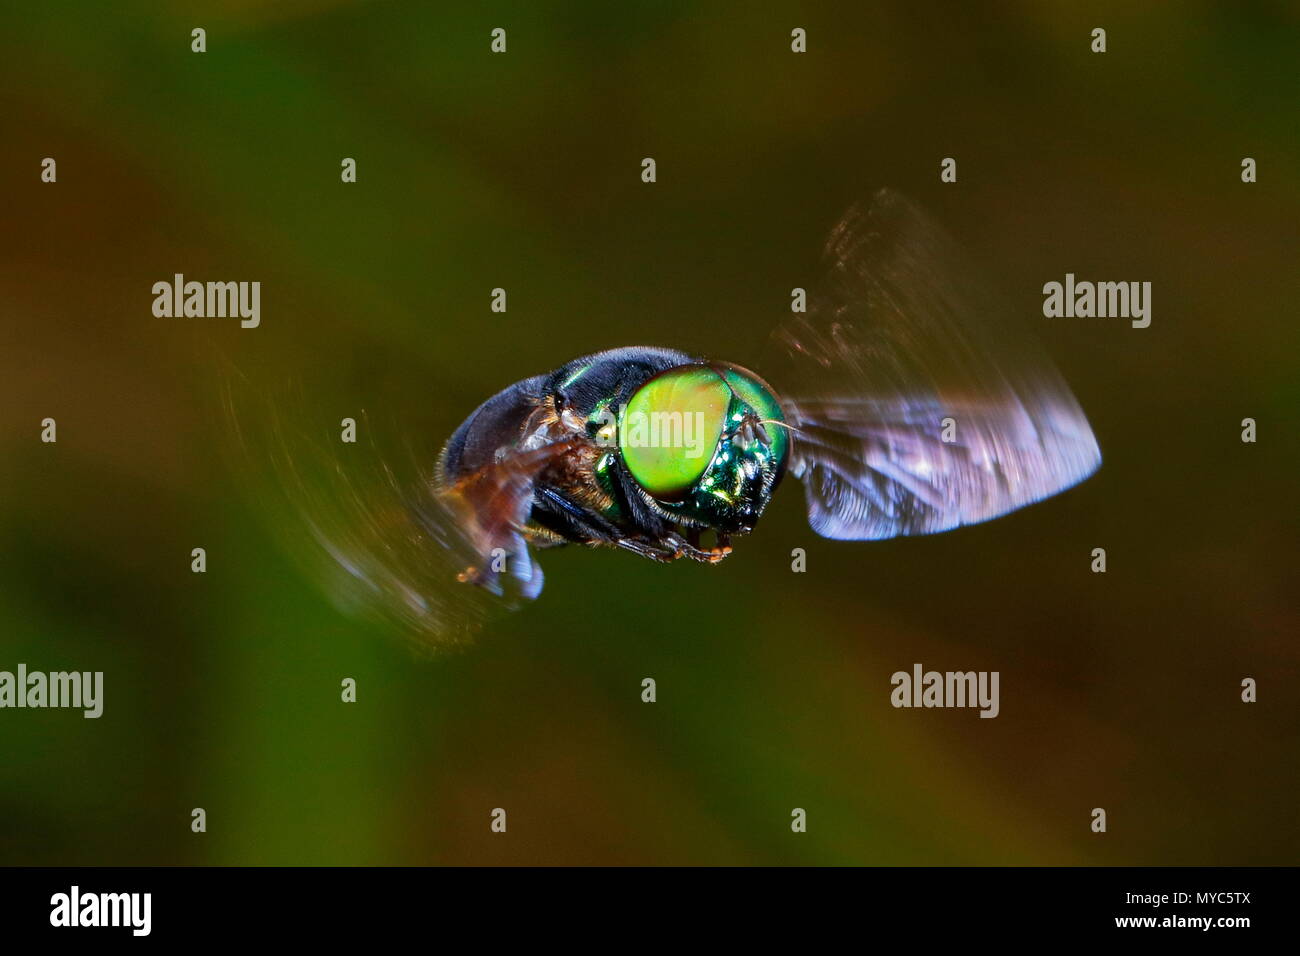 A green hoverfly, Ornidia obesa, in flight. Stock Photo